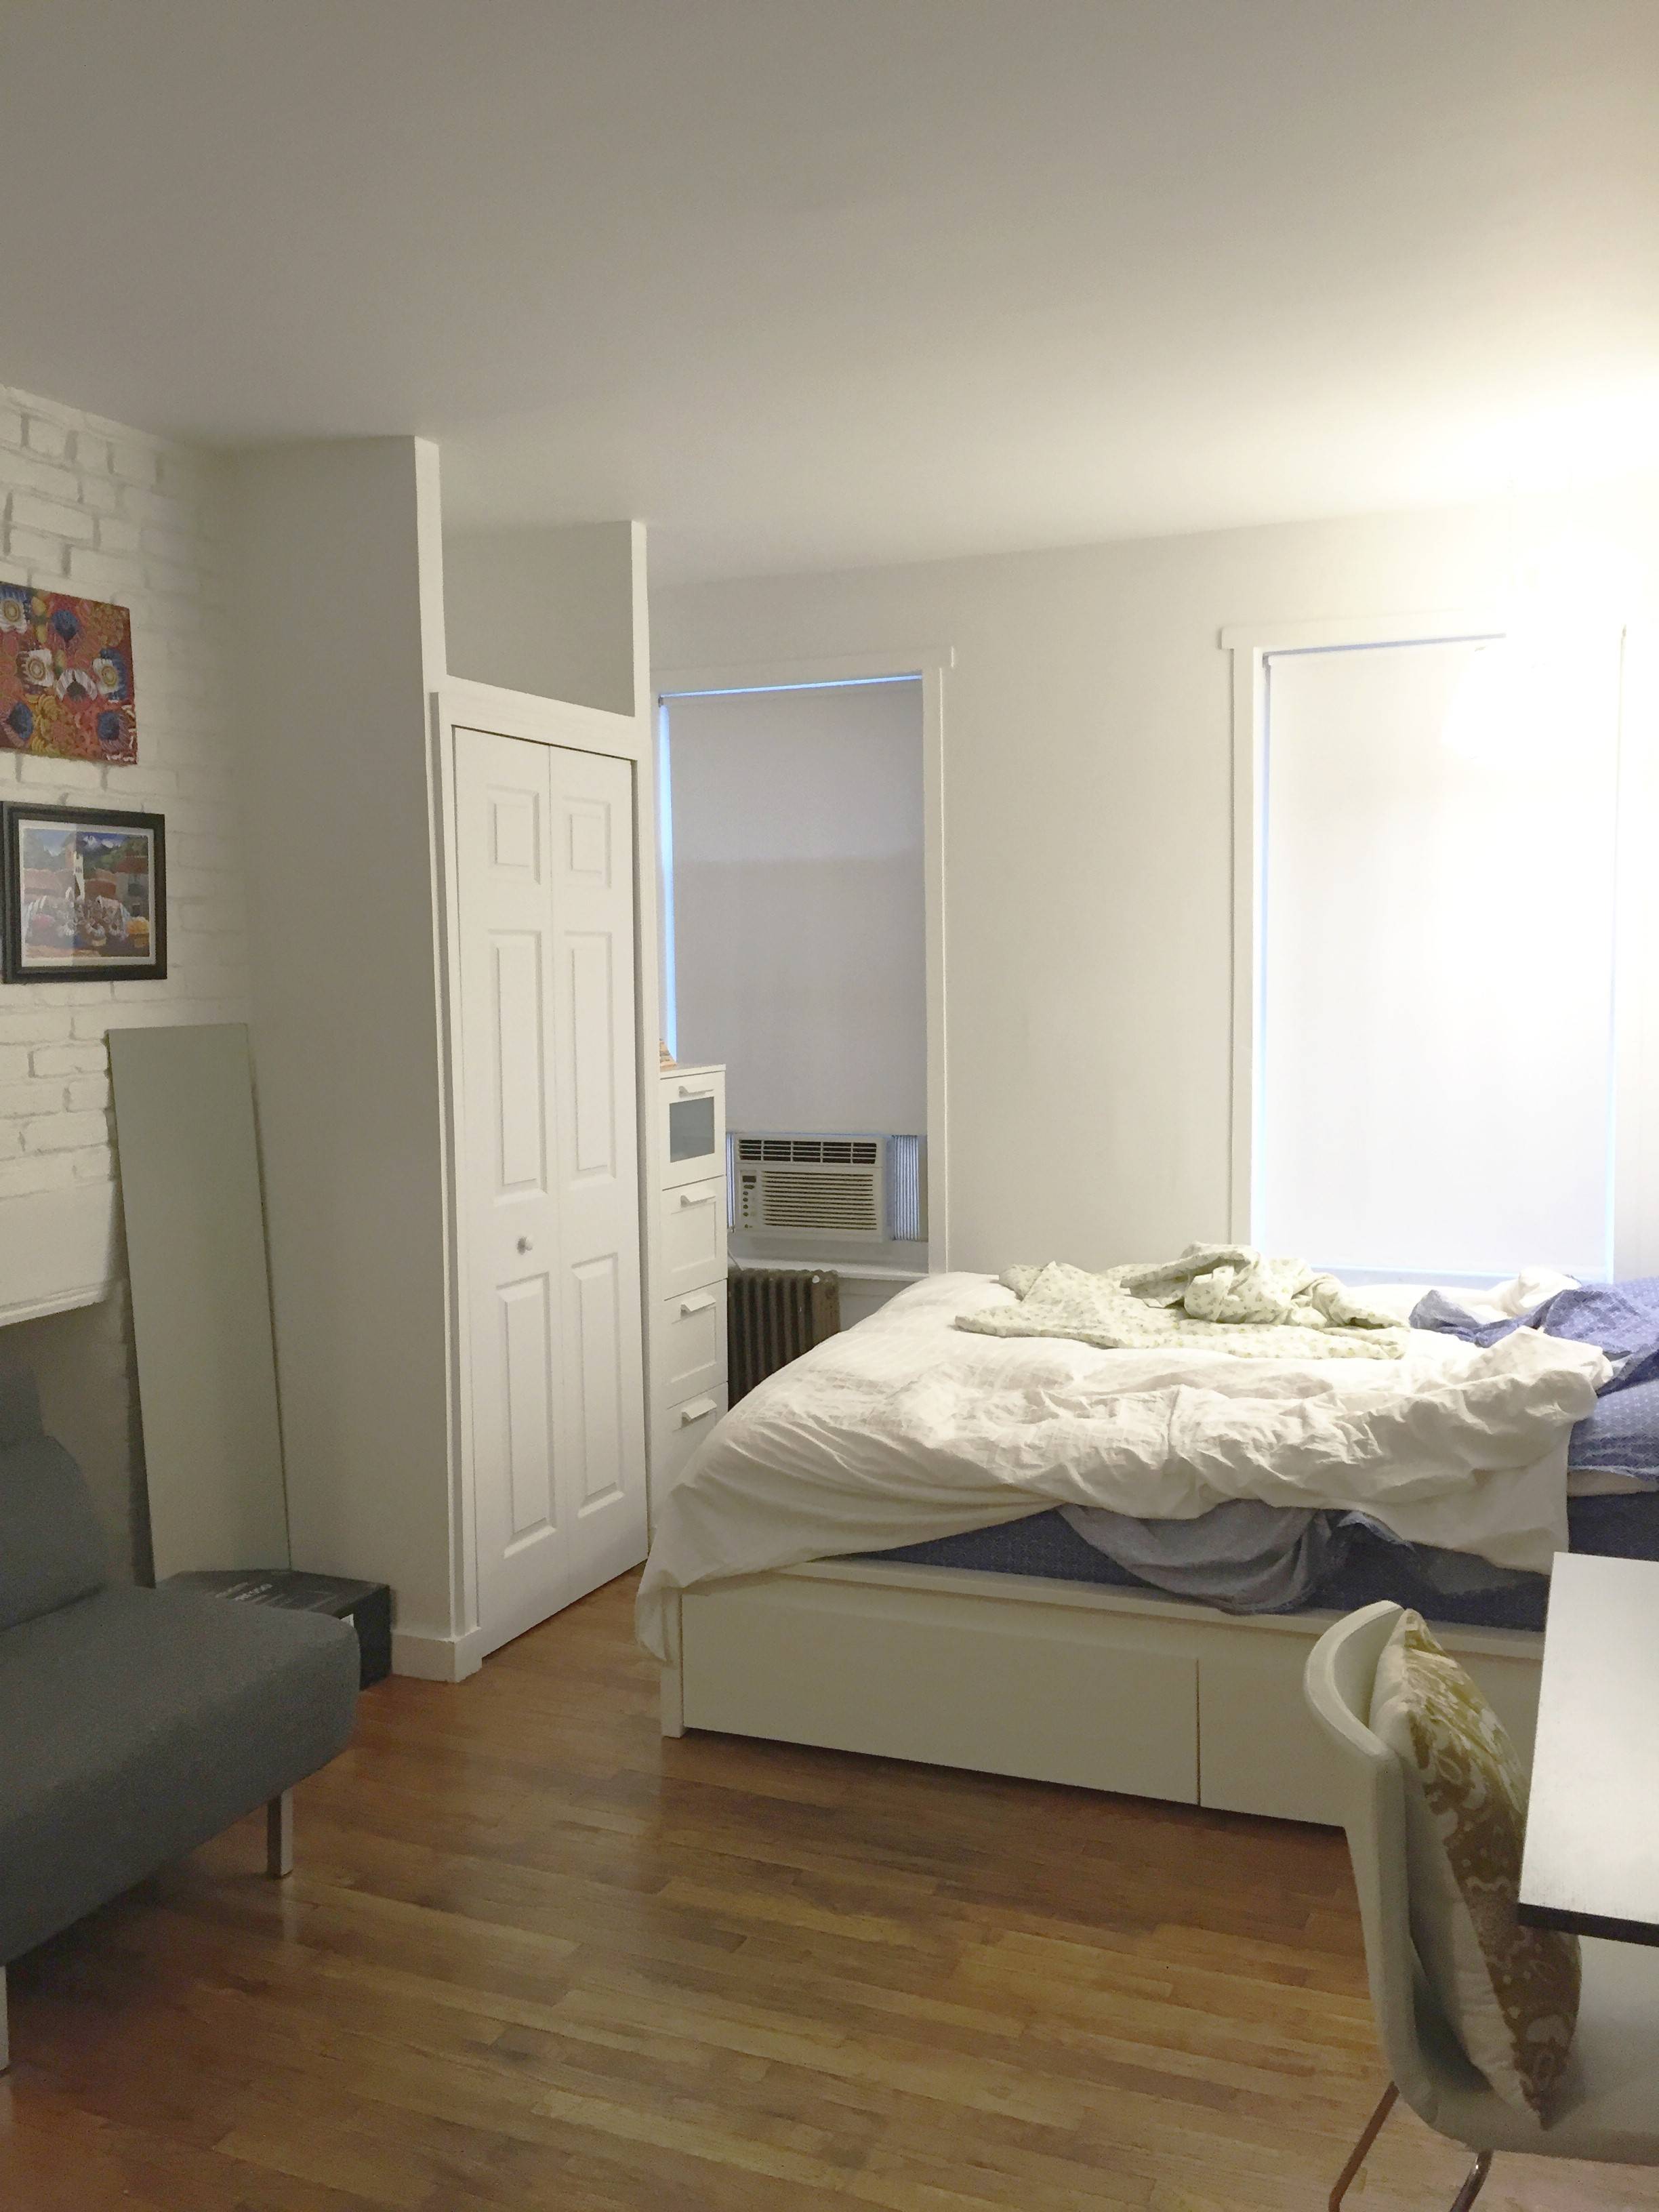 BEST PRICED Studio w/ Separate Kitchen, 2 Closets, Breakfast Bar Steps From A/C/E/7/1/2/3 & Penn Station